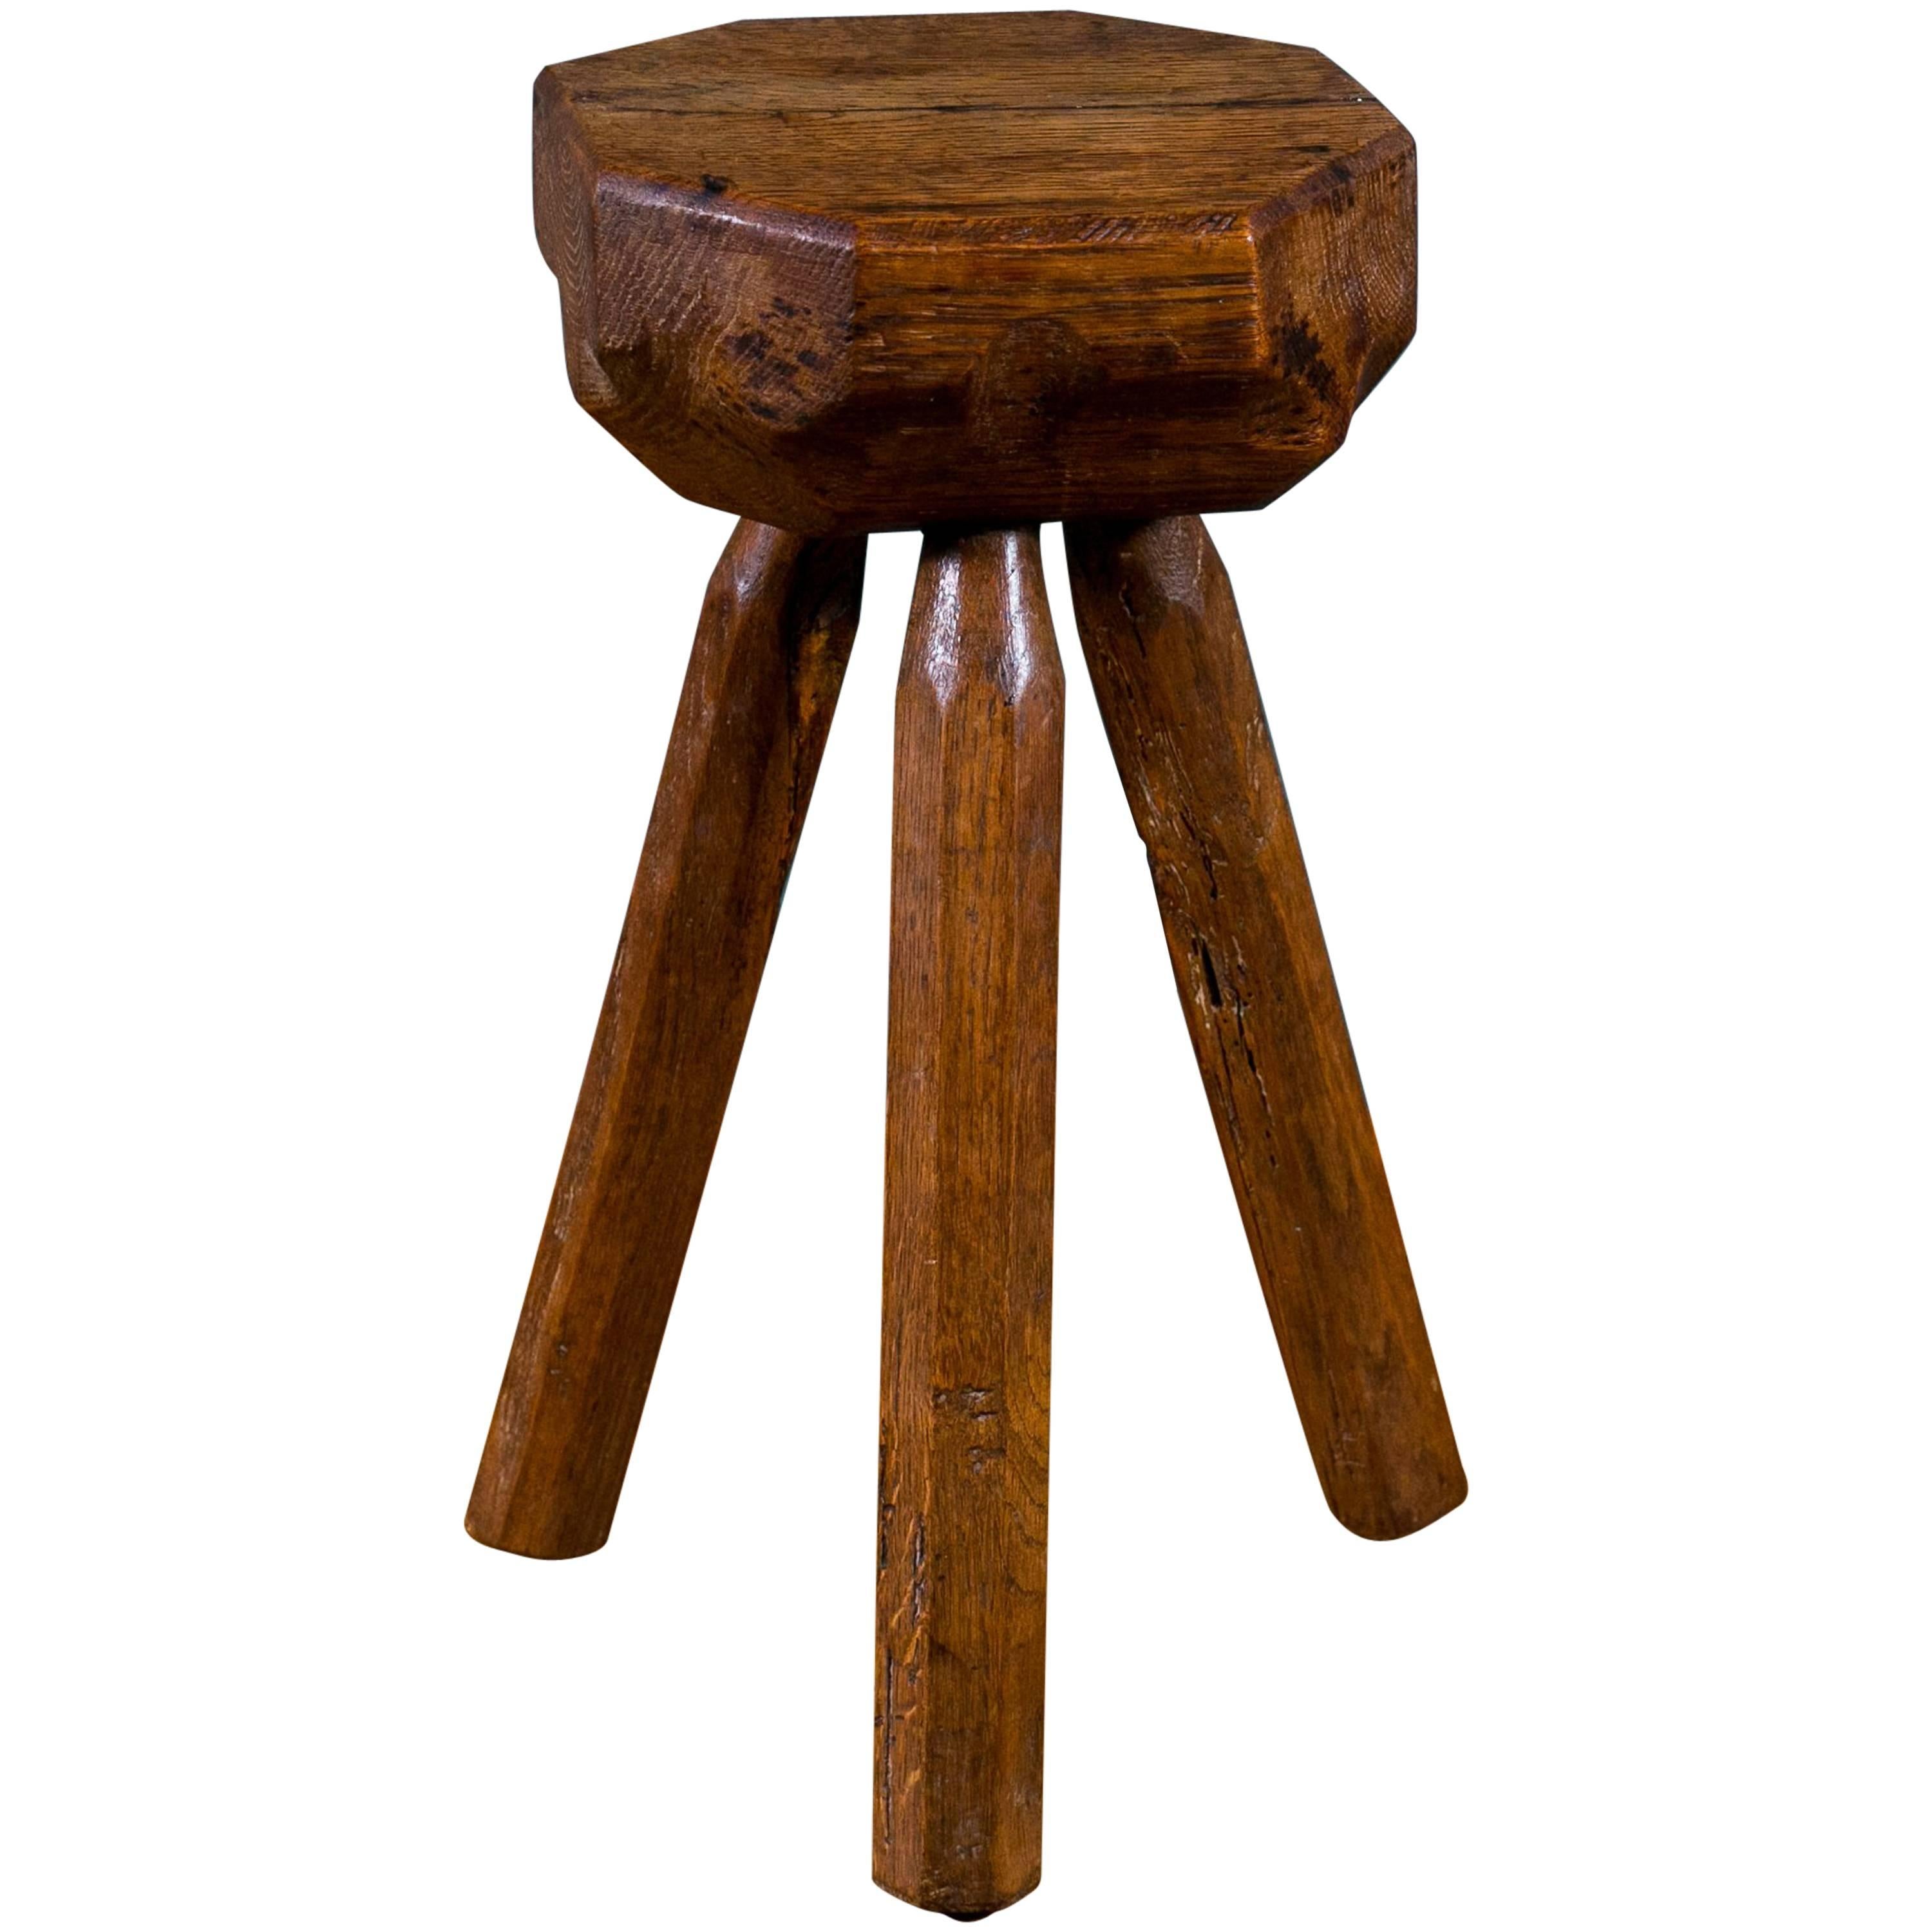 Small Hand-Carved Oak Stool from Belgium, circa 1940